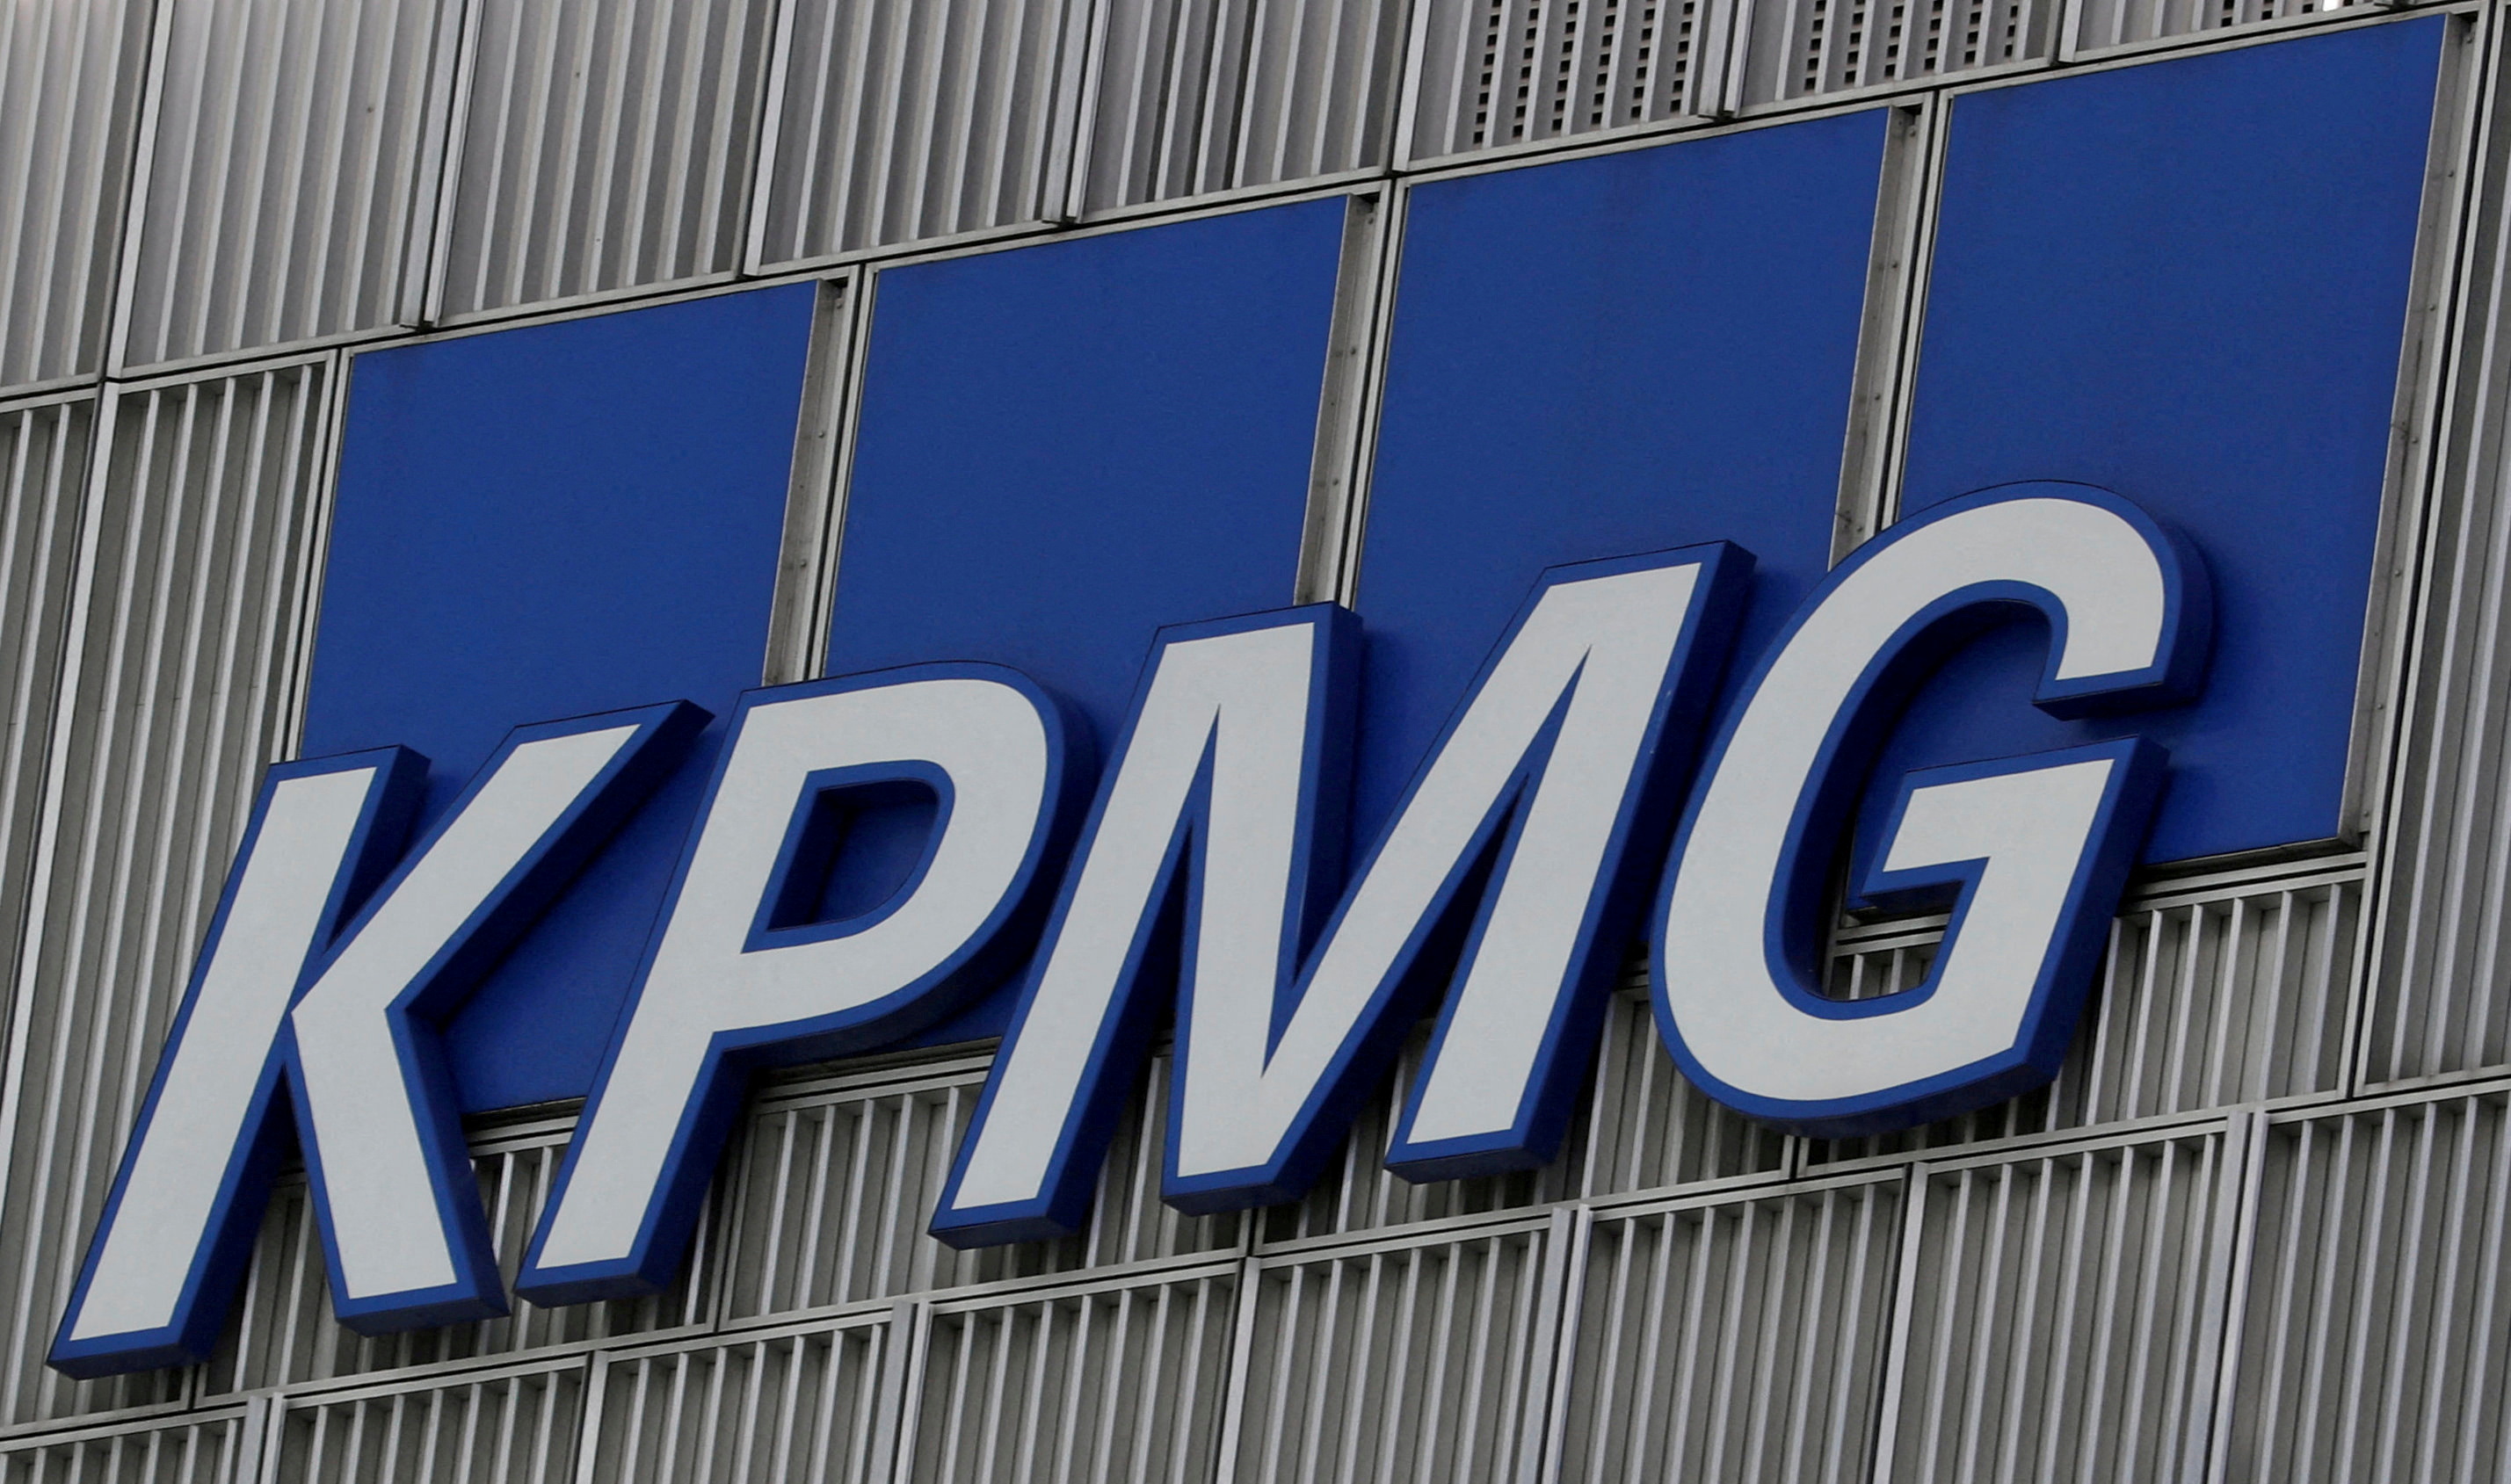 The KPMG logo is seen at their offices at Canary Wharf financial district in London